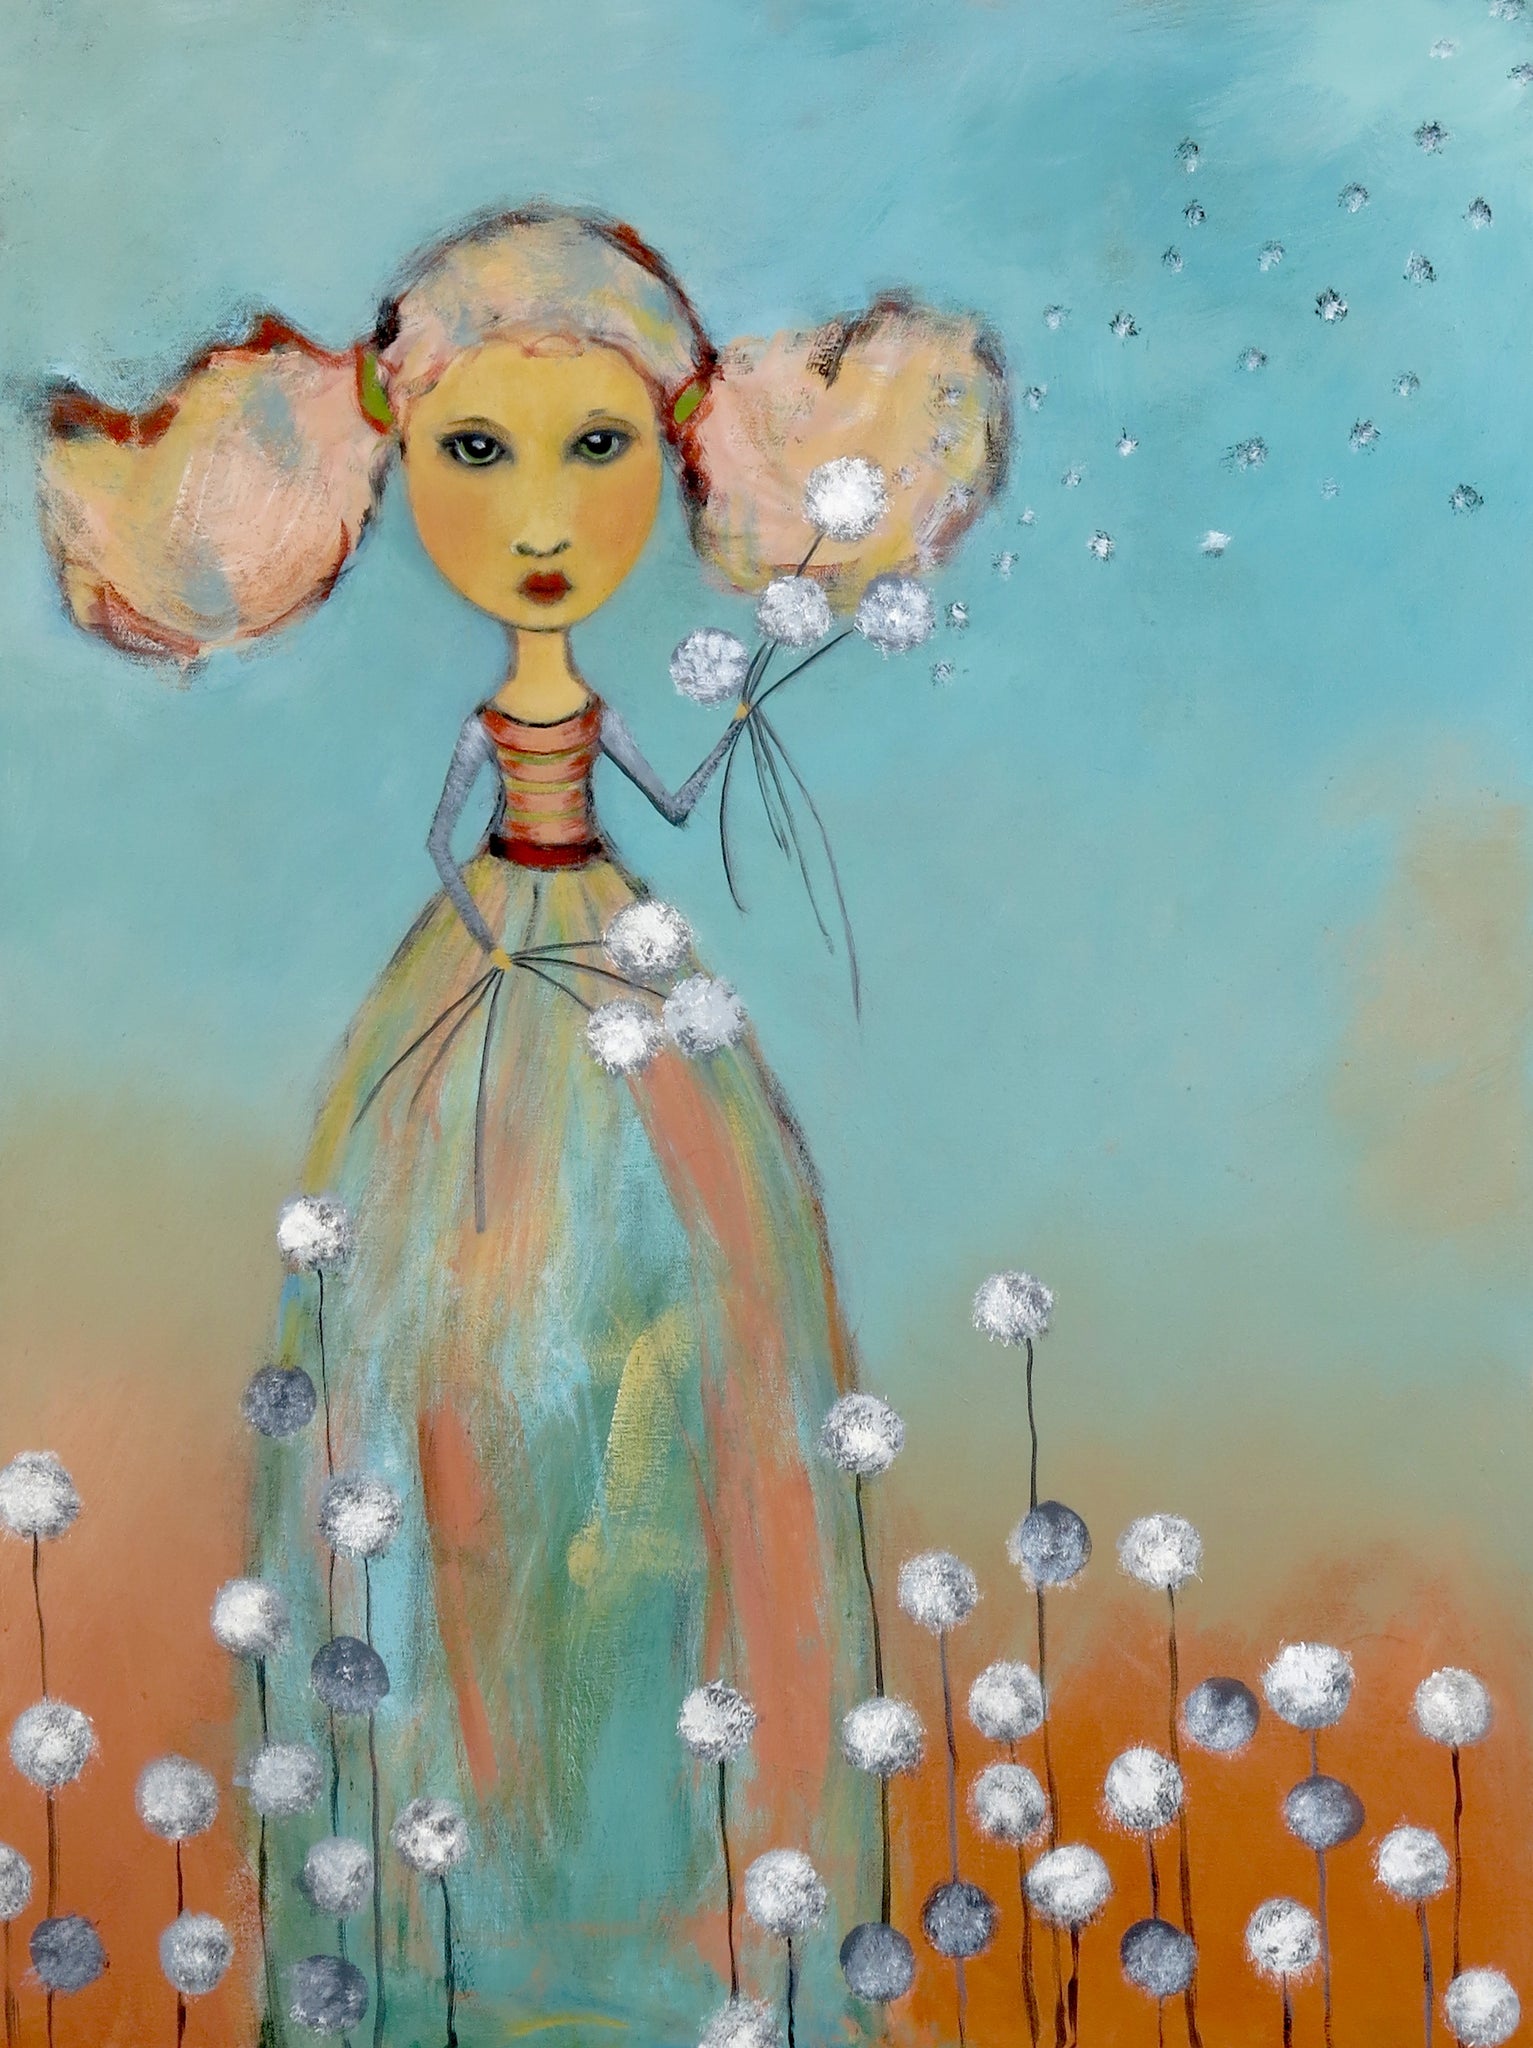 SOLD   "Dandelion Girl Puts the Seeds of Change in Motion"